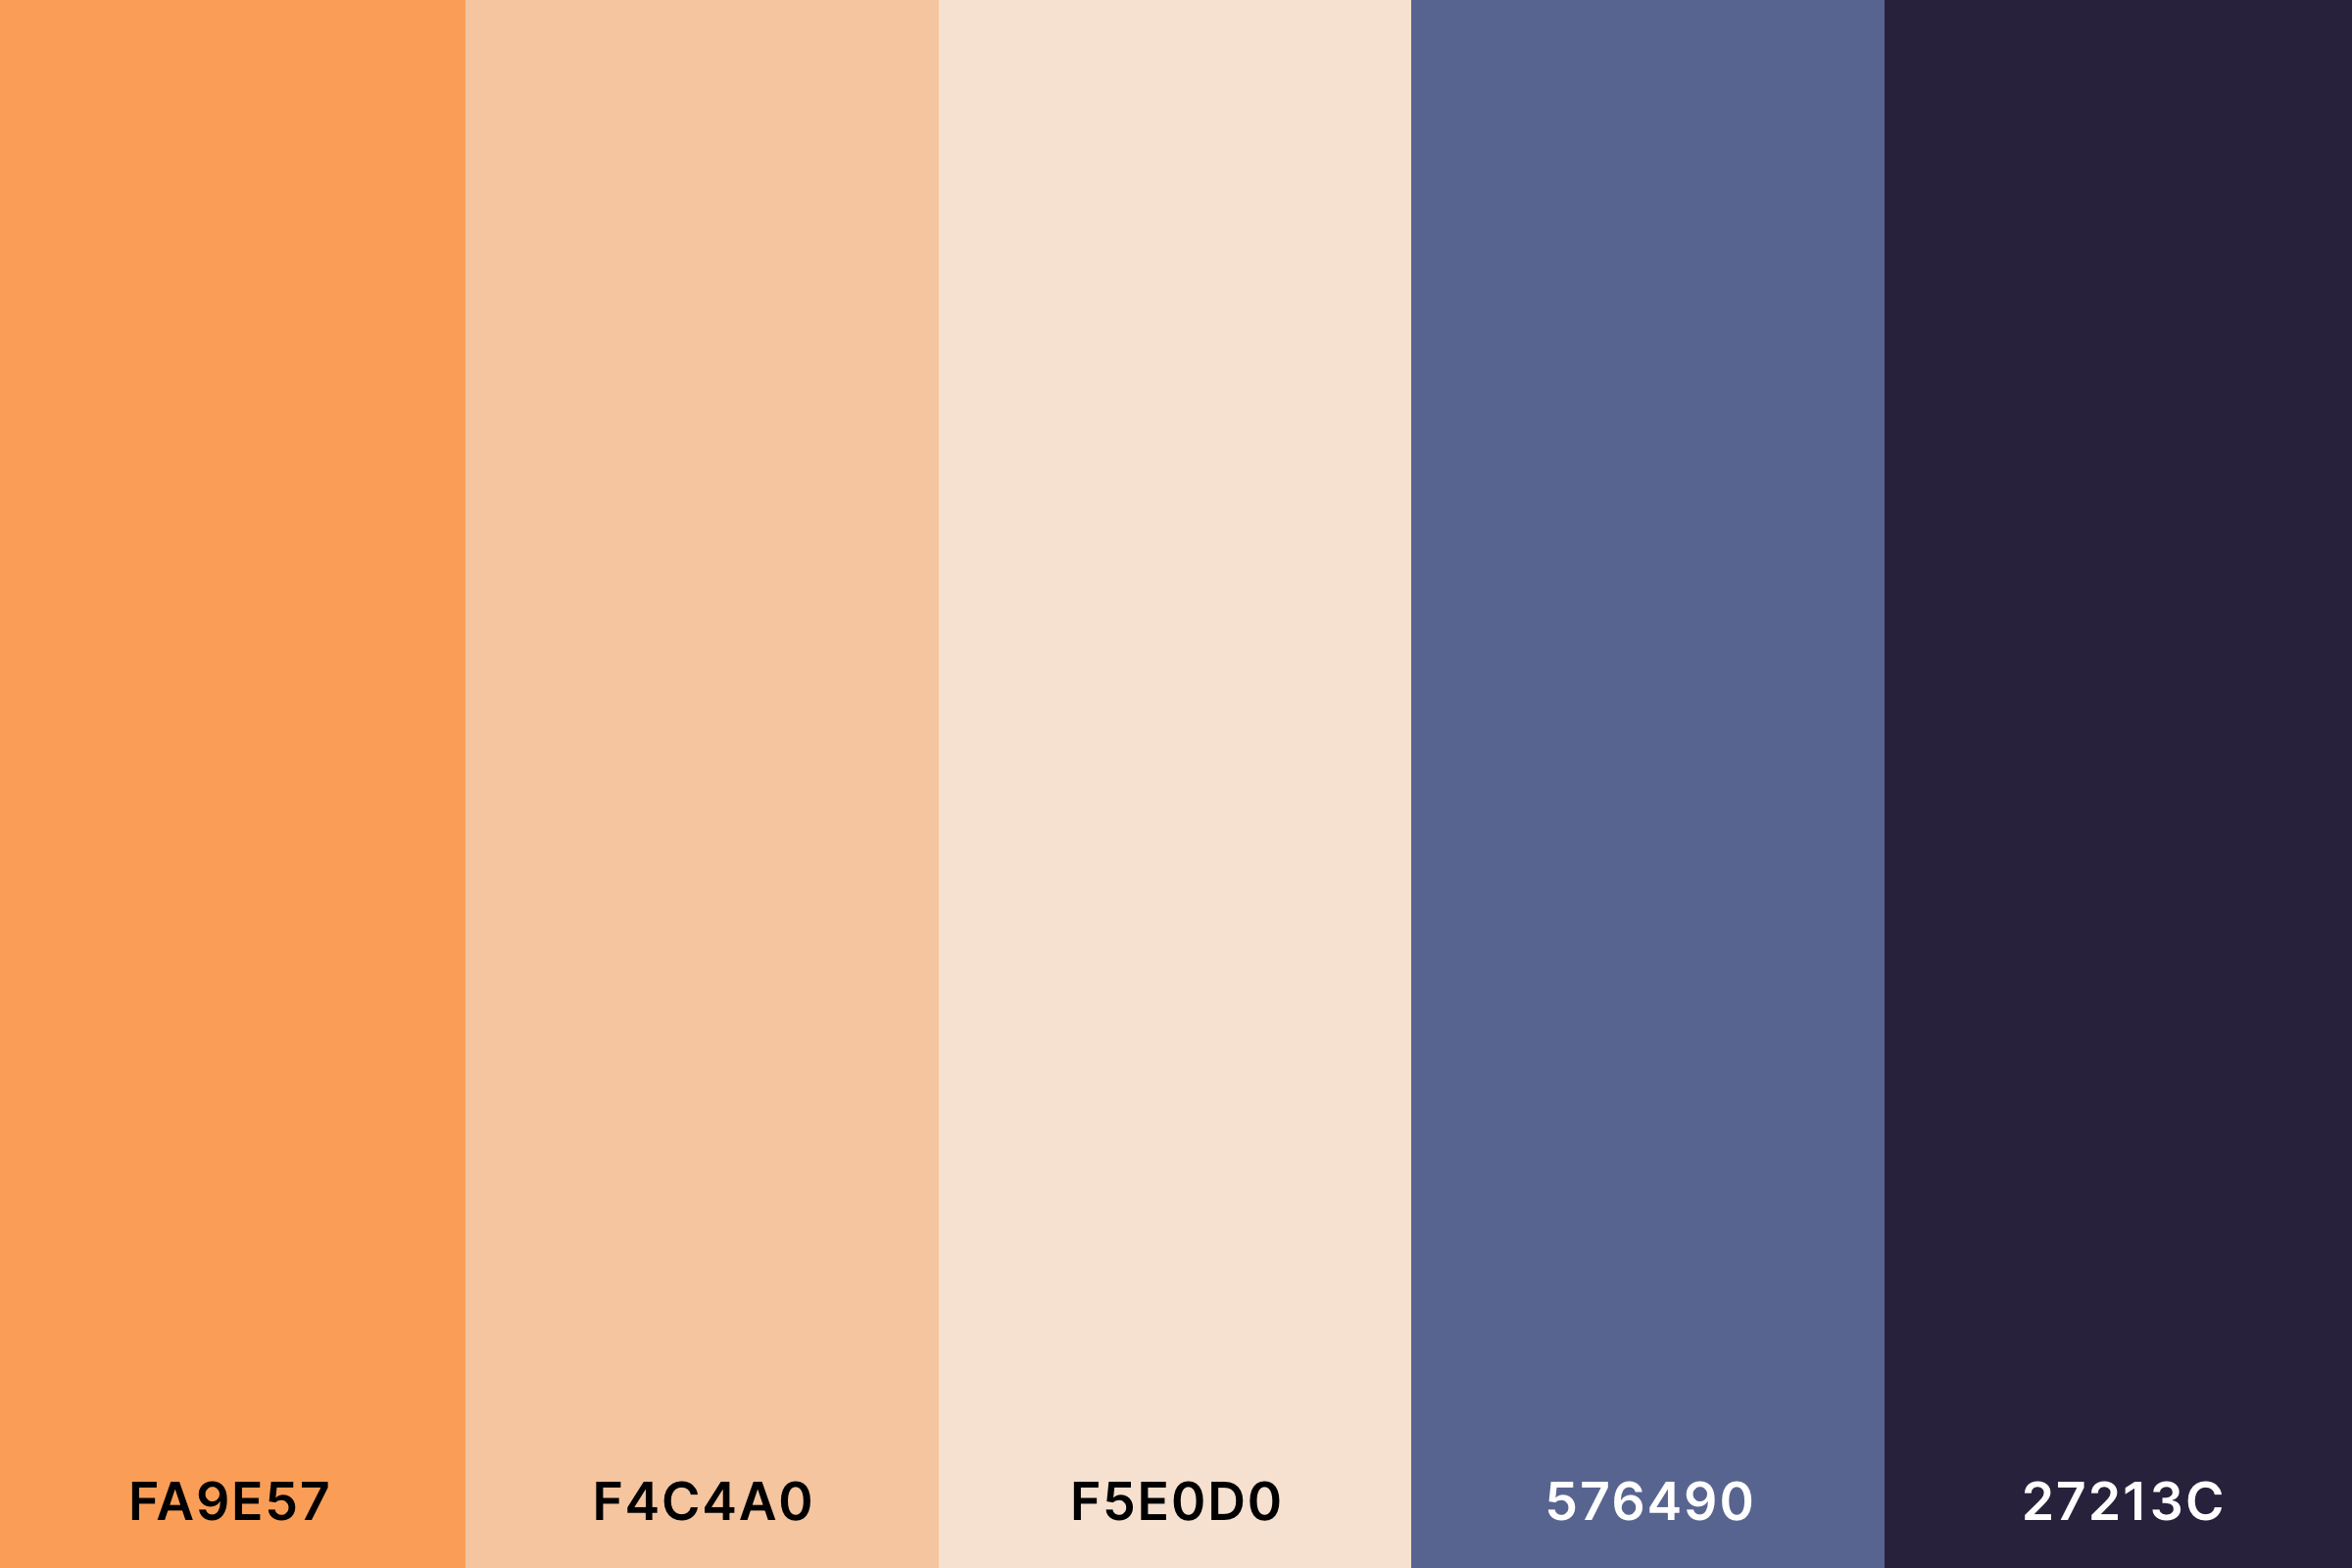 Blue and Peach Color Palette with Sandy Brown (Hex #FA9E57) + Peach (Hex #F4C4A0) + Champagne Pink (Hex #F5E0D0) + Ultra Violet (Hex #576490) + Dark Purple (Hex #27213C) Color Palette with Hex Codes